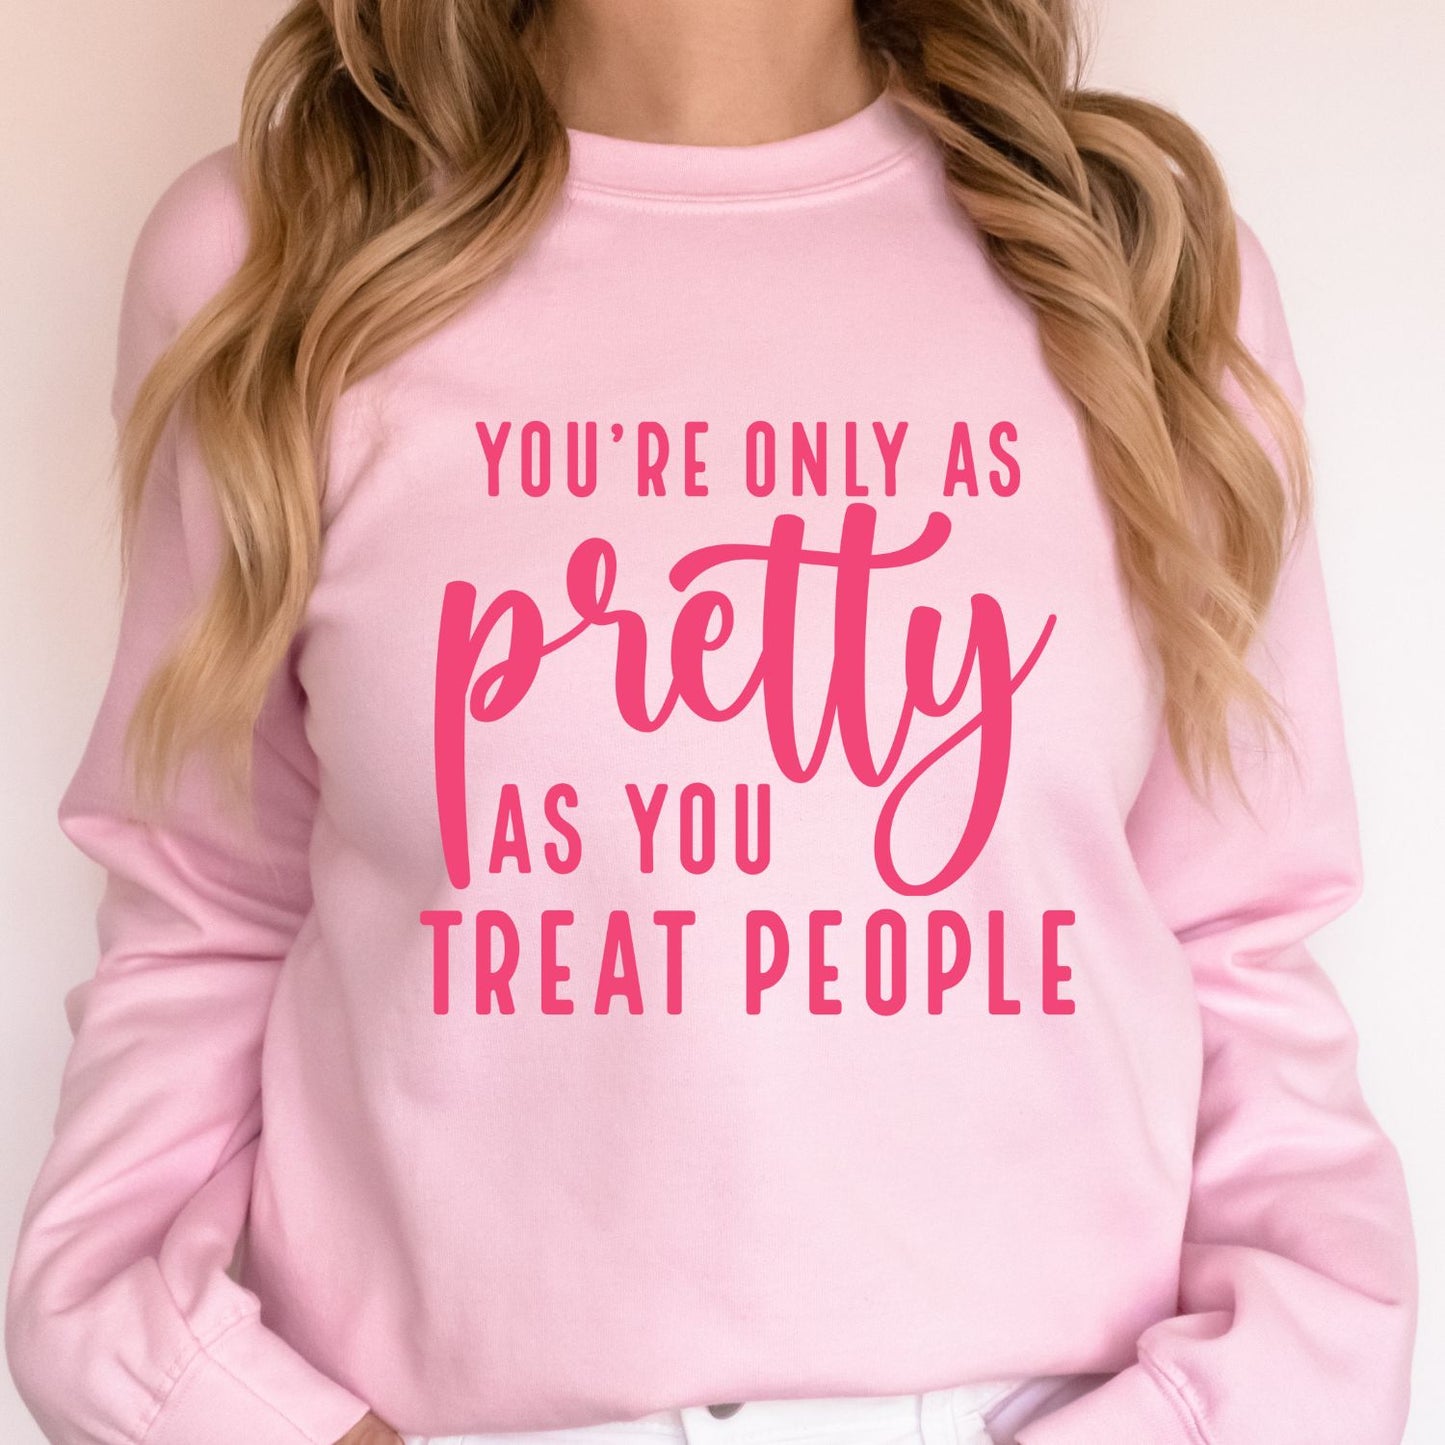 You're Only as Pretty as You Treat People